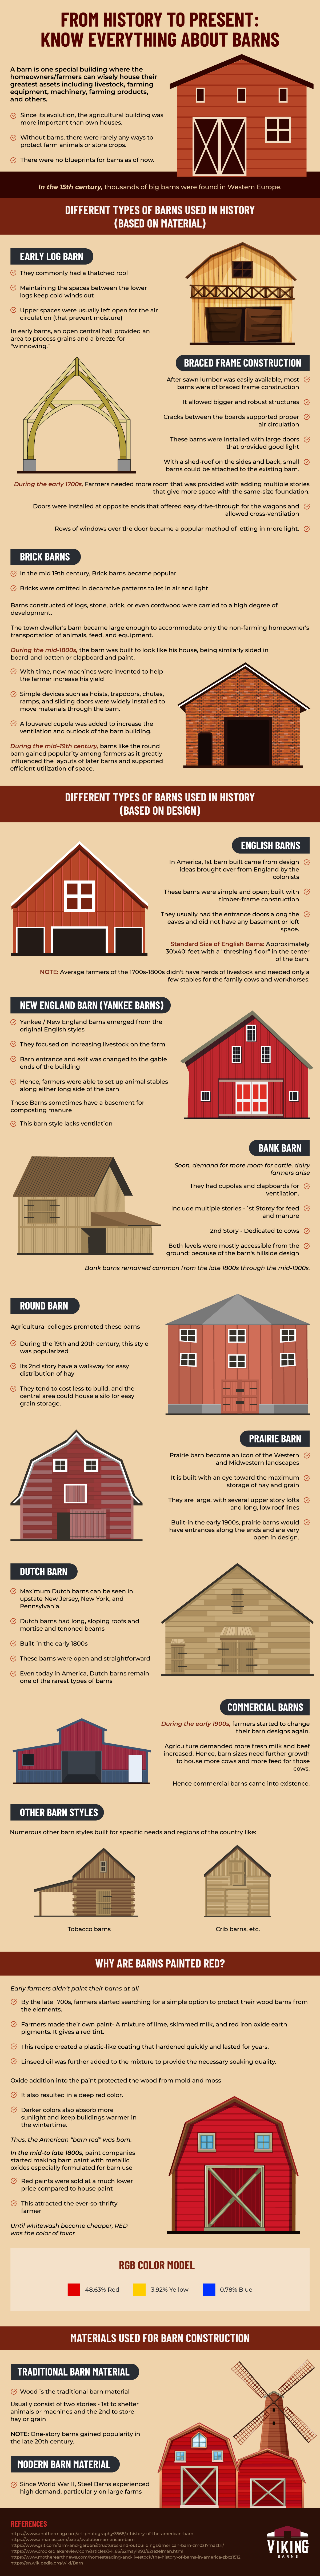 From History to Present: Know Everything About BARNS